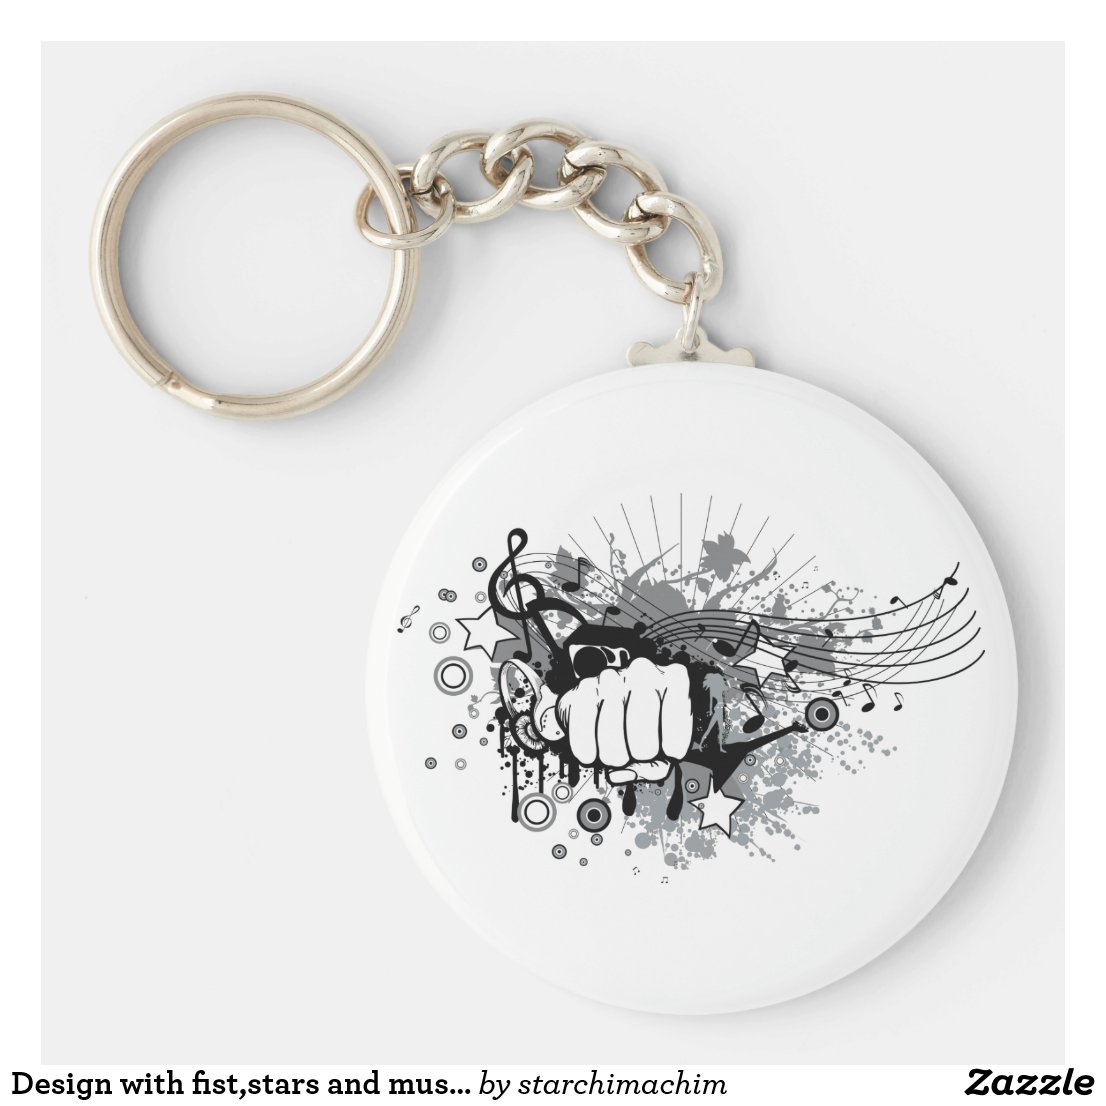 design with fist stars and musical notes on key ring r930a3690e63844209e24b1b3328ab0cd x7j3z 8byvr 1024.jpg